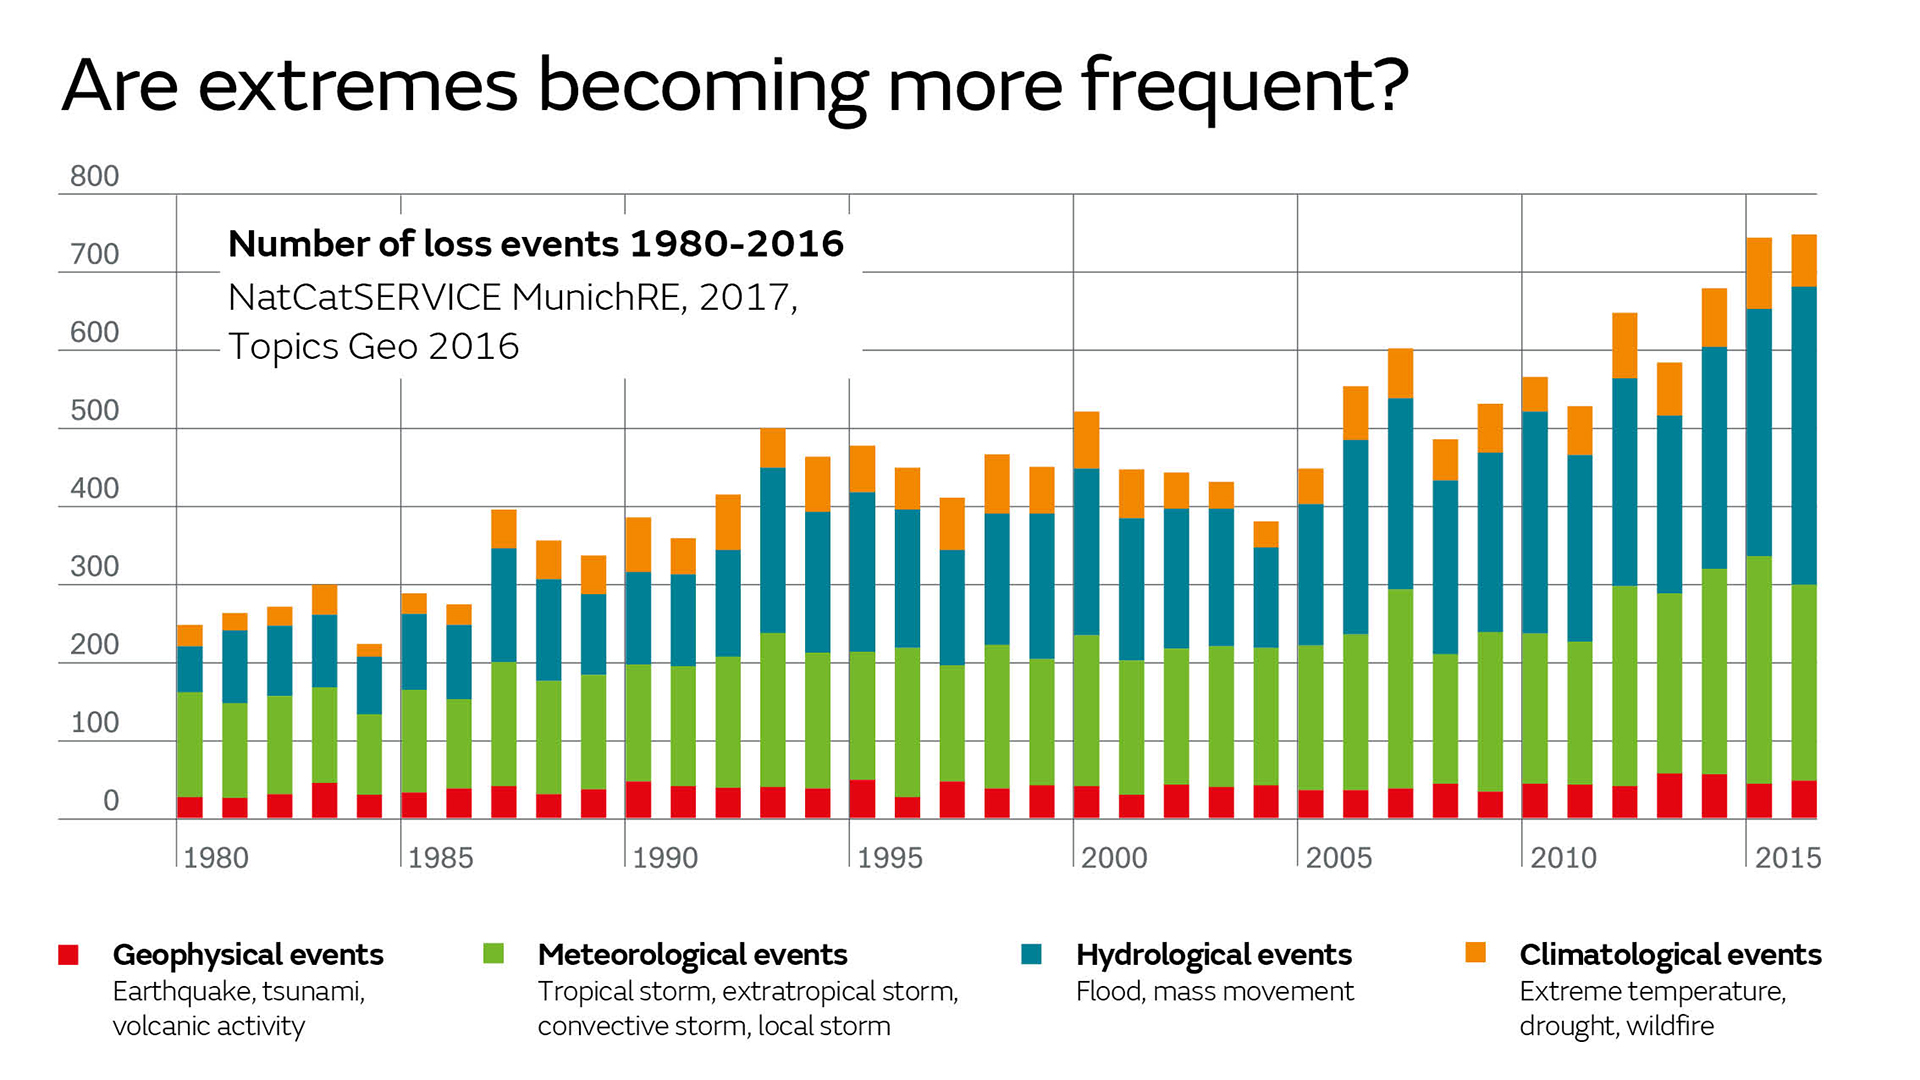 Graph showing the rising number of geophysical, meteorological, hydrological and climatological events that cause a loss. The number increases over time, from roughly 250 events in 1980 to over 700 events in 2016.